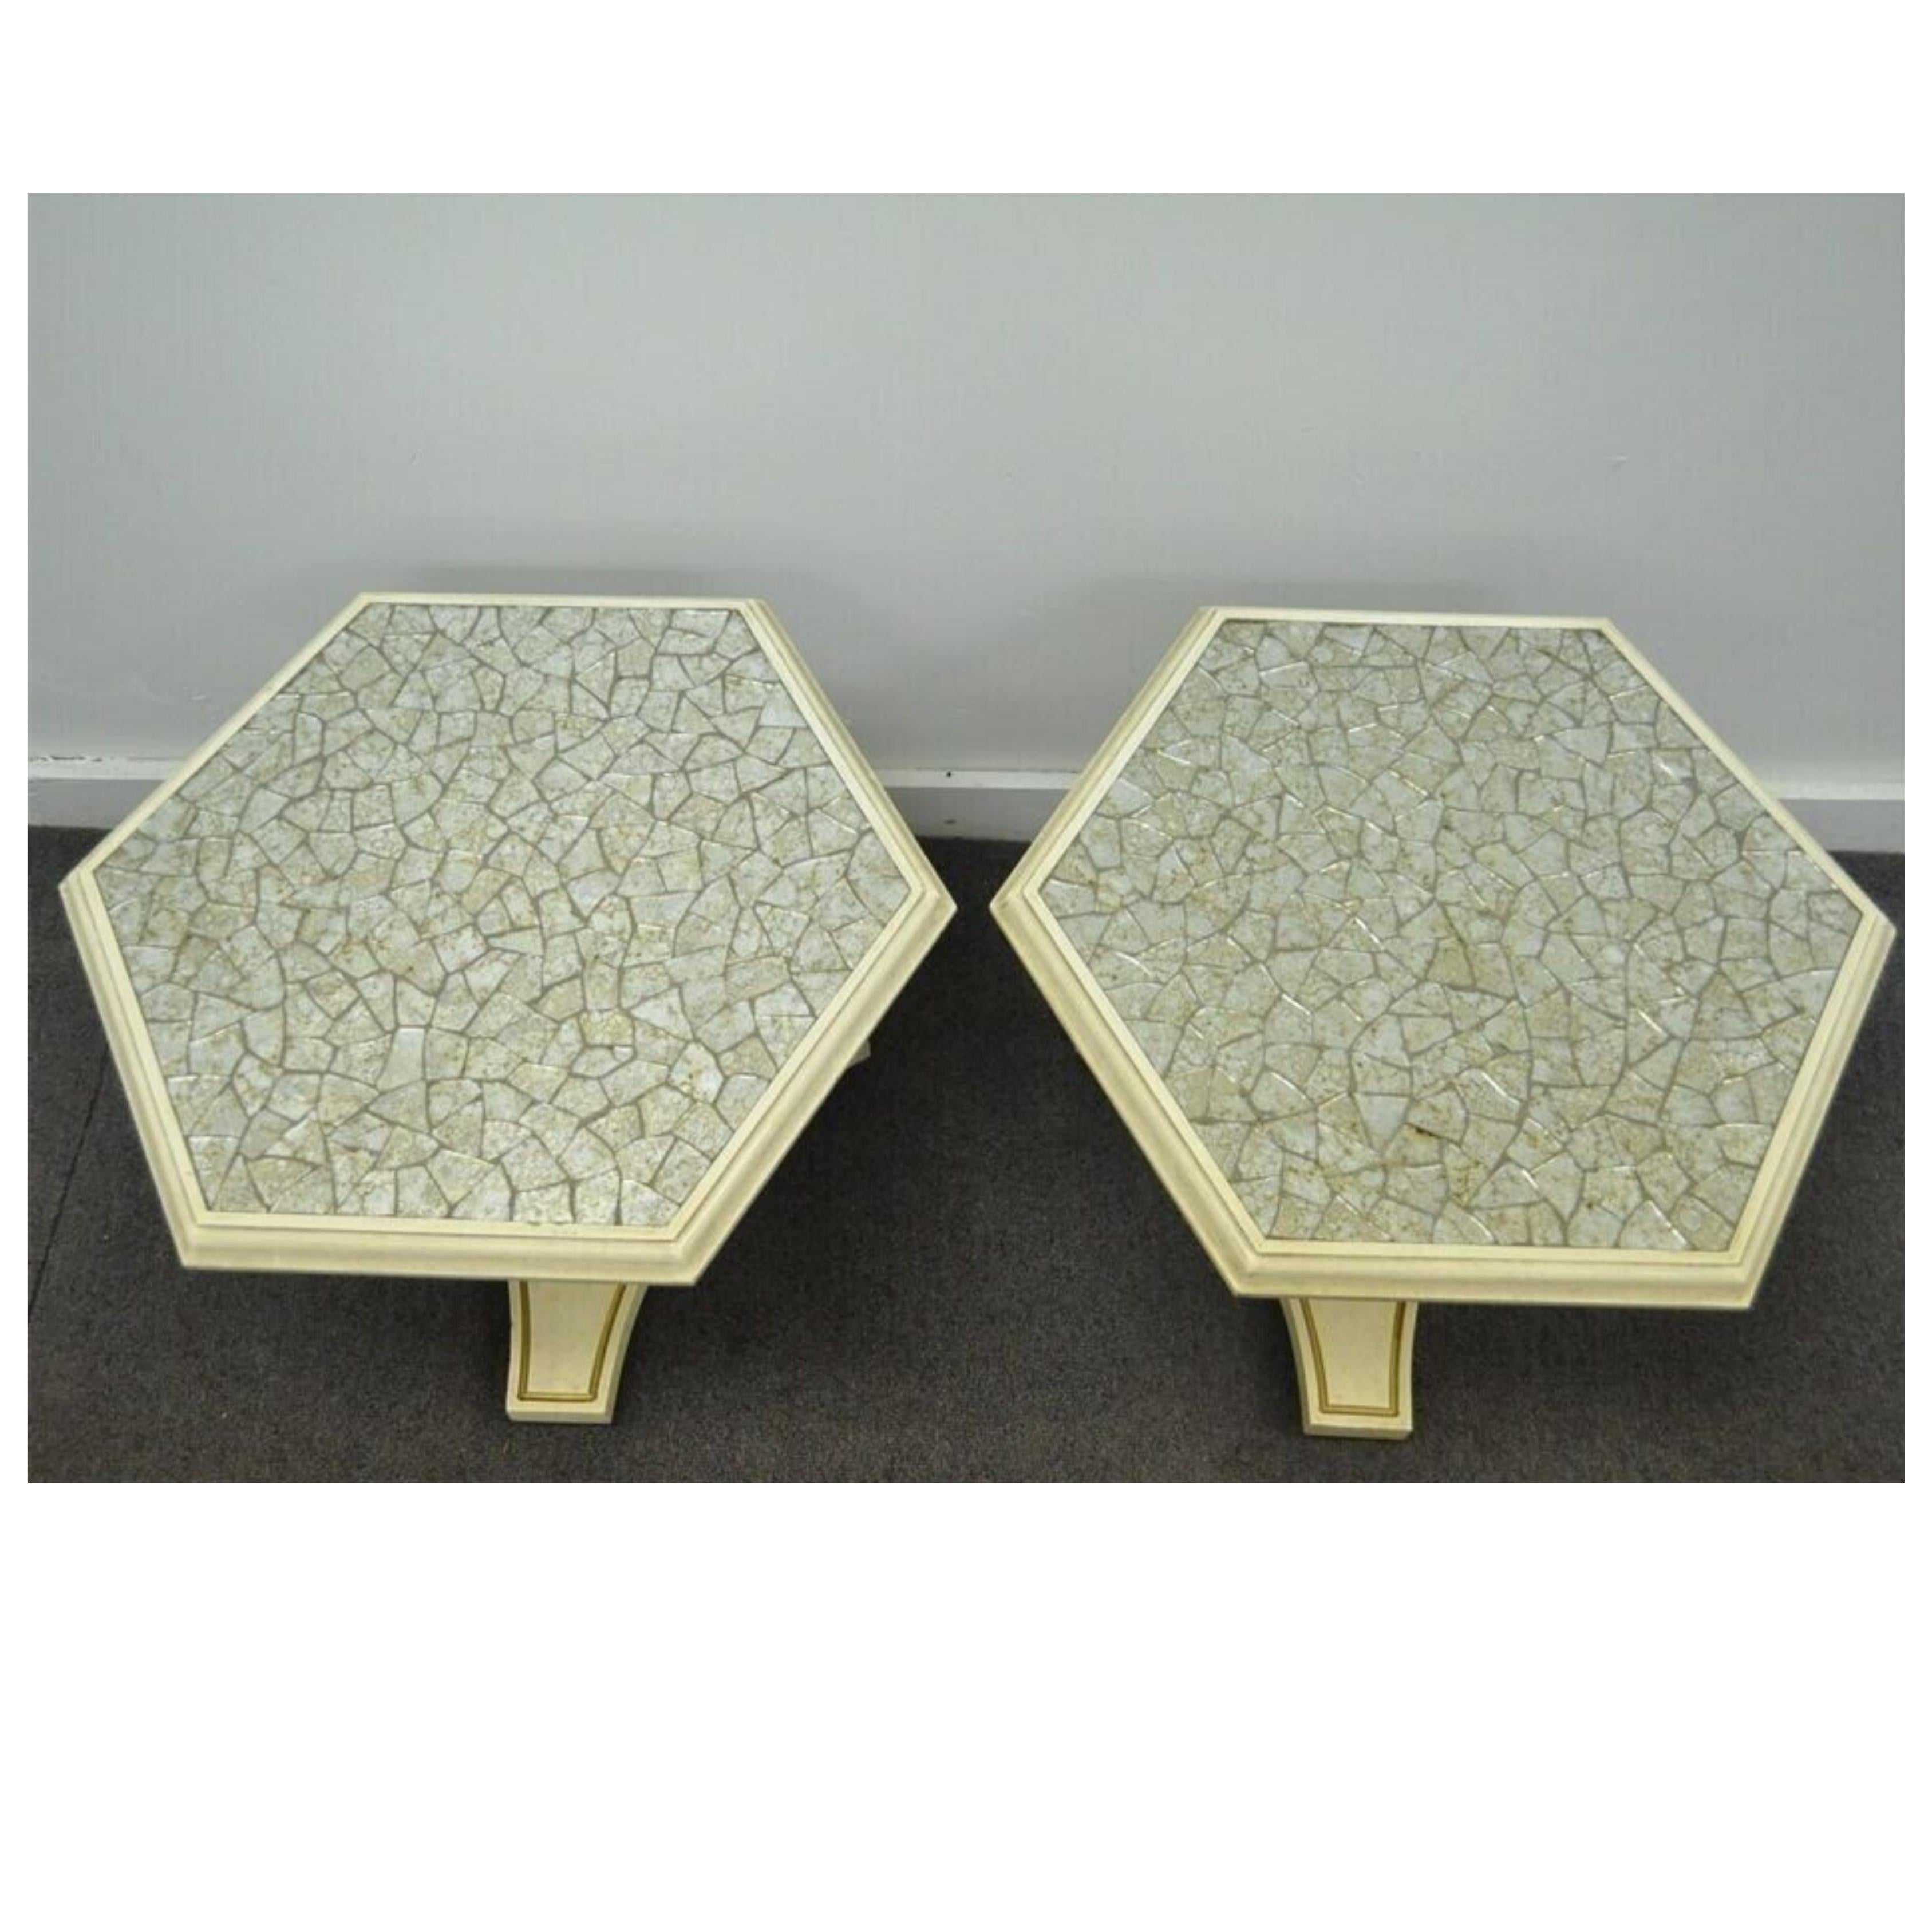 Hollywood Regency Mosaic Glass Tile Top Low Pedestal Side Tables - a Pair In Good Condition For Sale In Philadelphia, PA